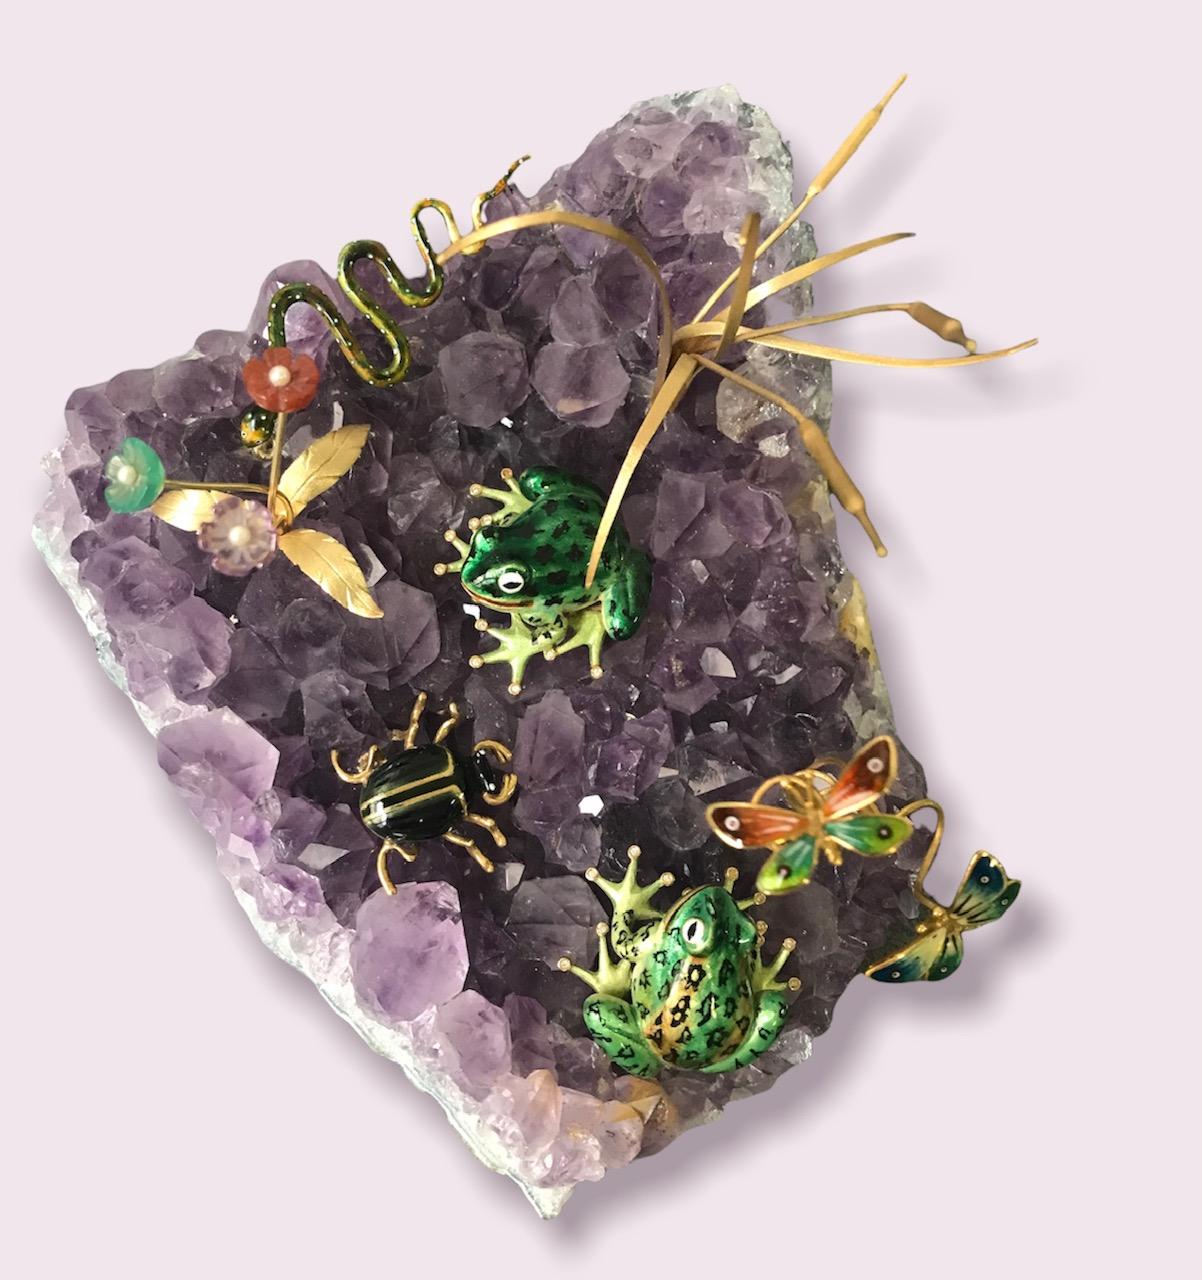 Ornamental Pond On Amethyst Cluster Block.
Animals and plants in 18 karat gold embellished by enamel finishes set on an amethyst cluster block base.
Total weight gr. 113.40
Gold weight is not quantifiable as pieces are attached to the ornament.
